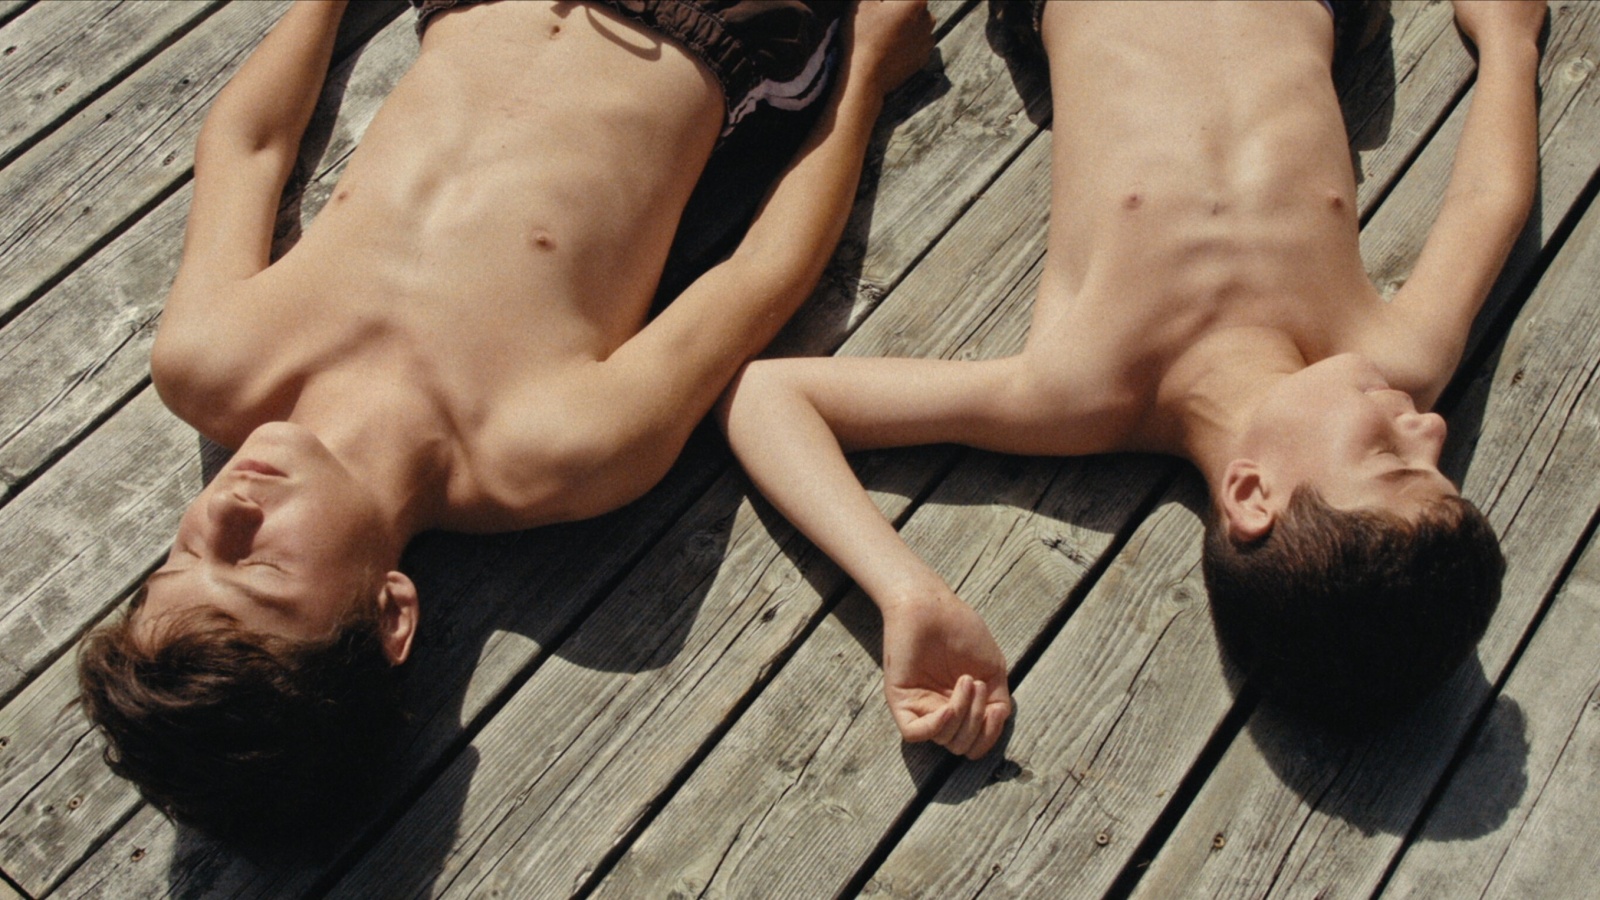 eng: Two brothers are sunbathing in the sun with their eyes closed.